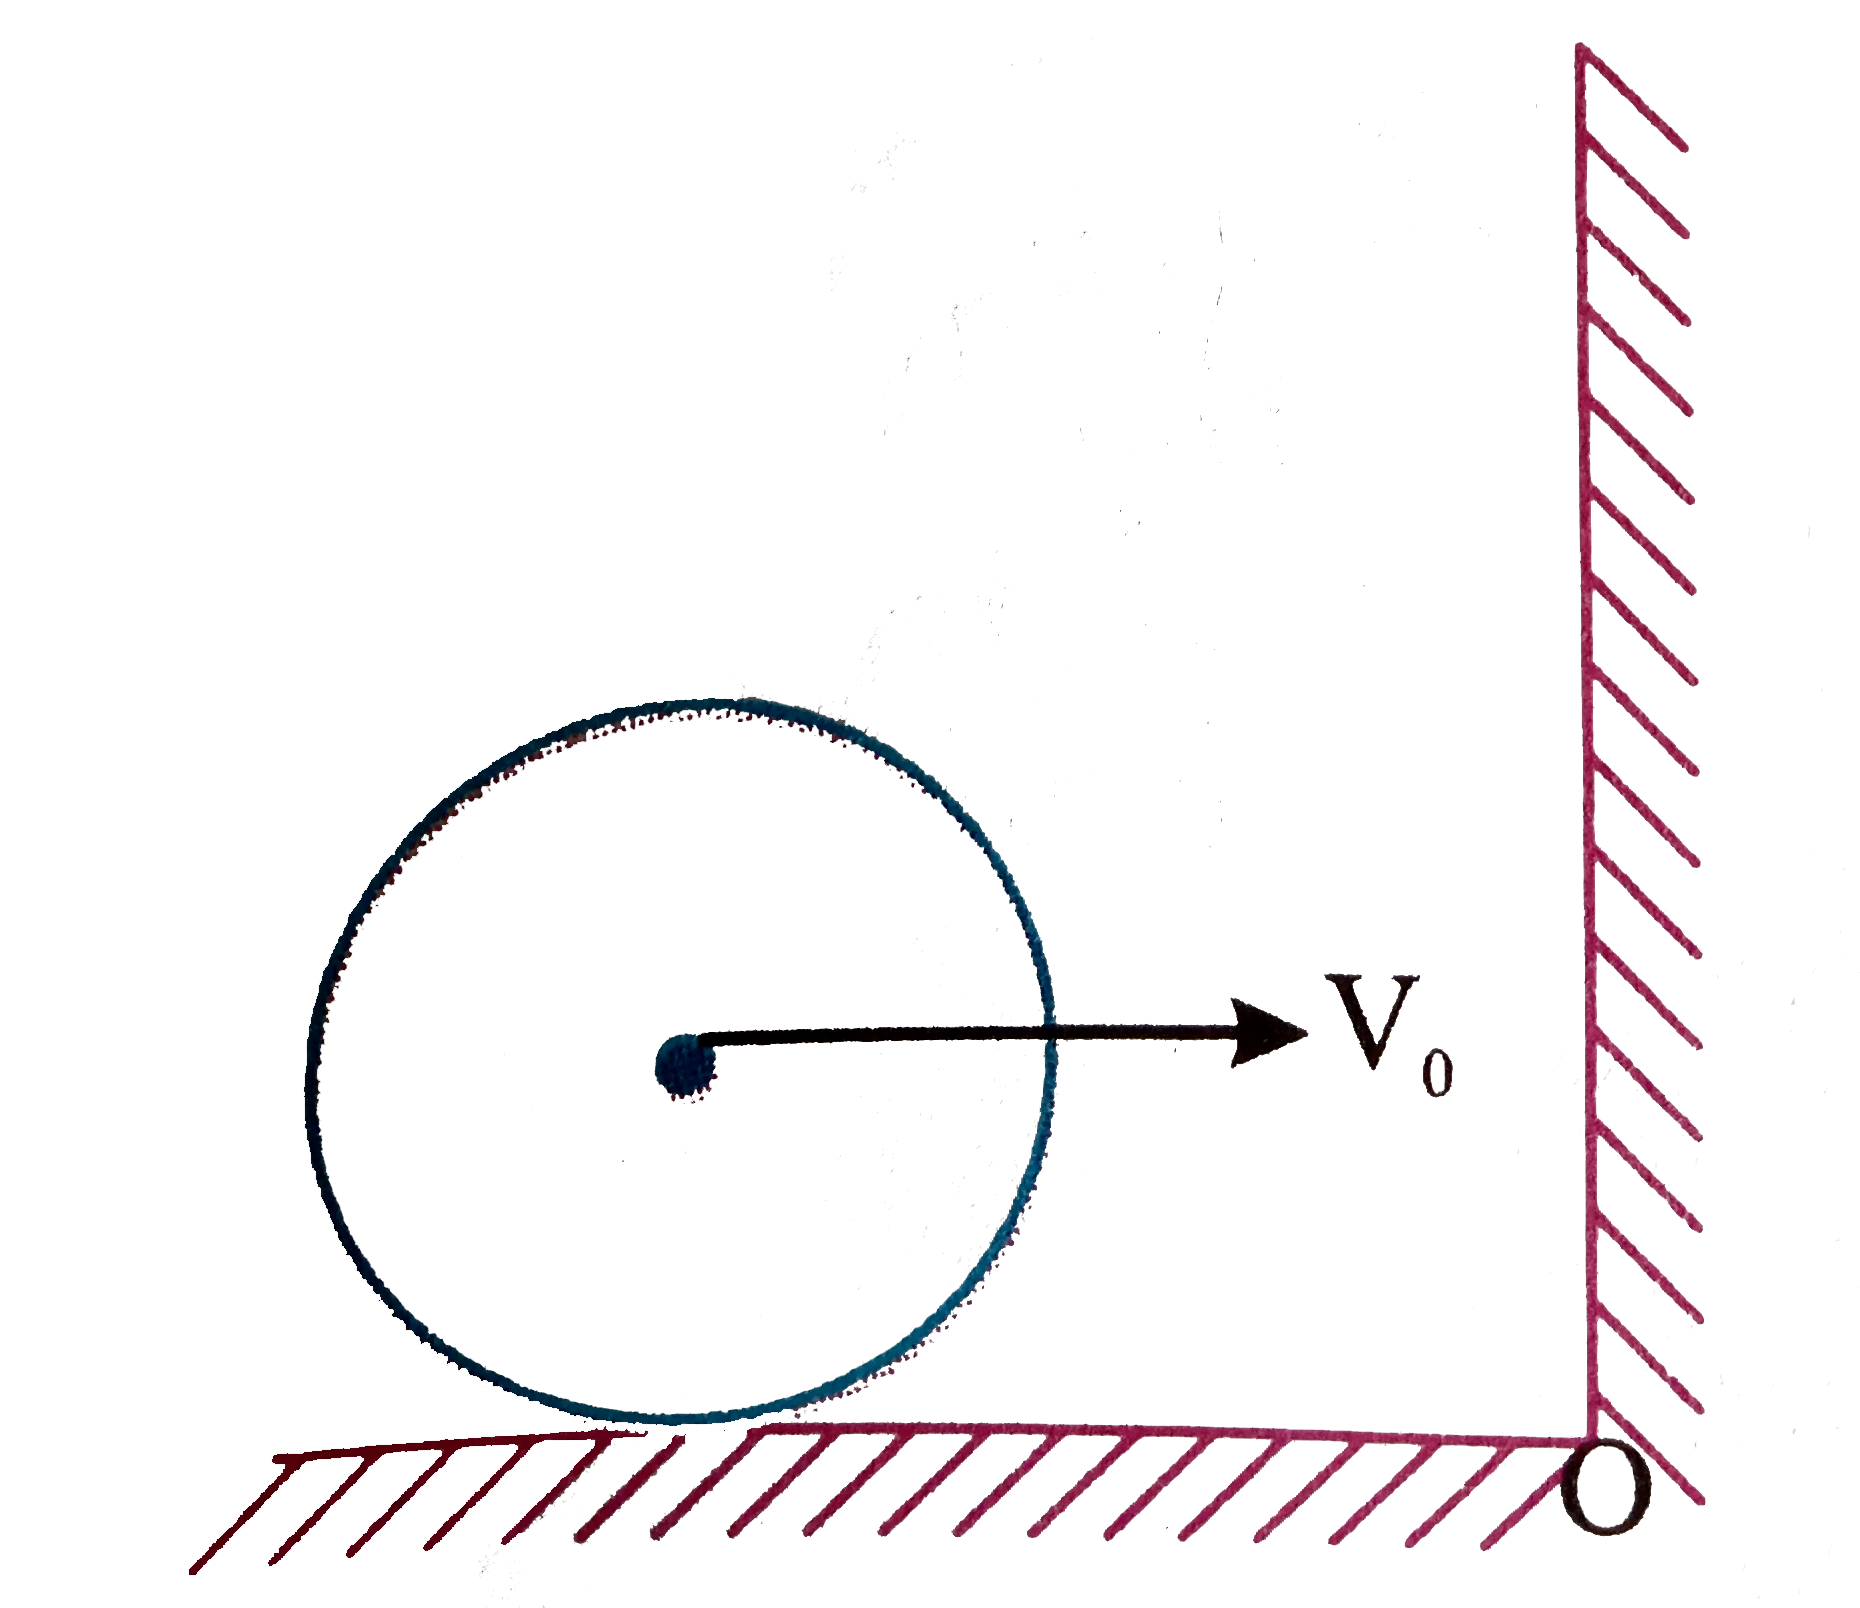 Consider a sphere of mass 'm' radius 'R' doing pure rolling motion on a rough surface having velocity vec(v)(0) as shown in the figure. It makes an elastic impact with the smooth wall and moves back and starts rolling after some time again.